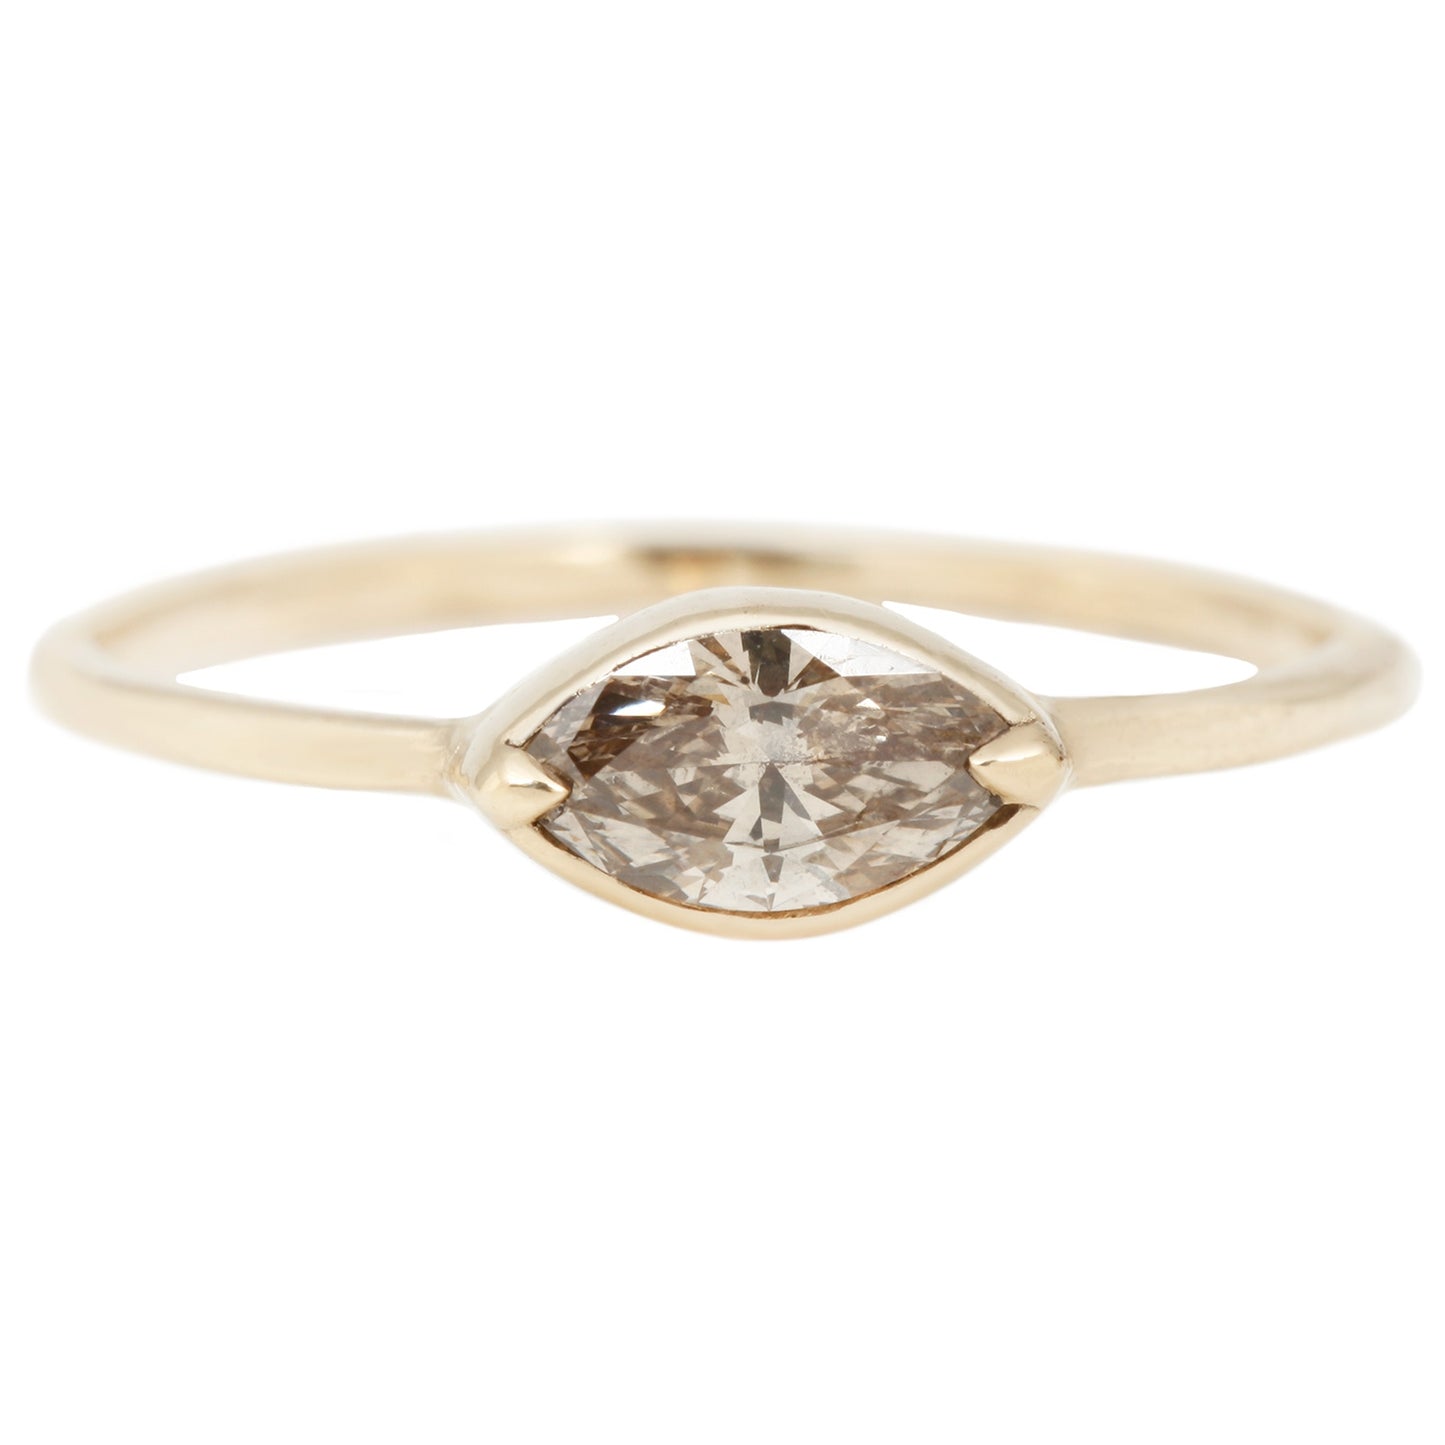 Lauren Wolf Champagne Diamond Marquise Ring Set in Yellow Gold